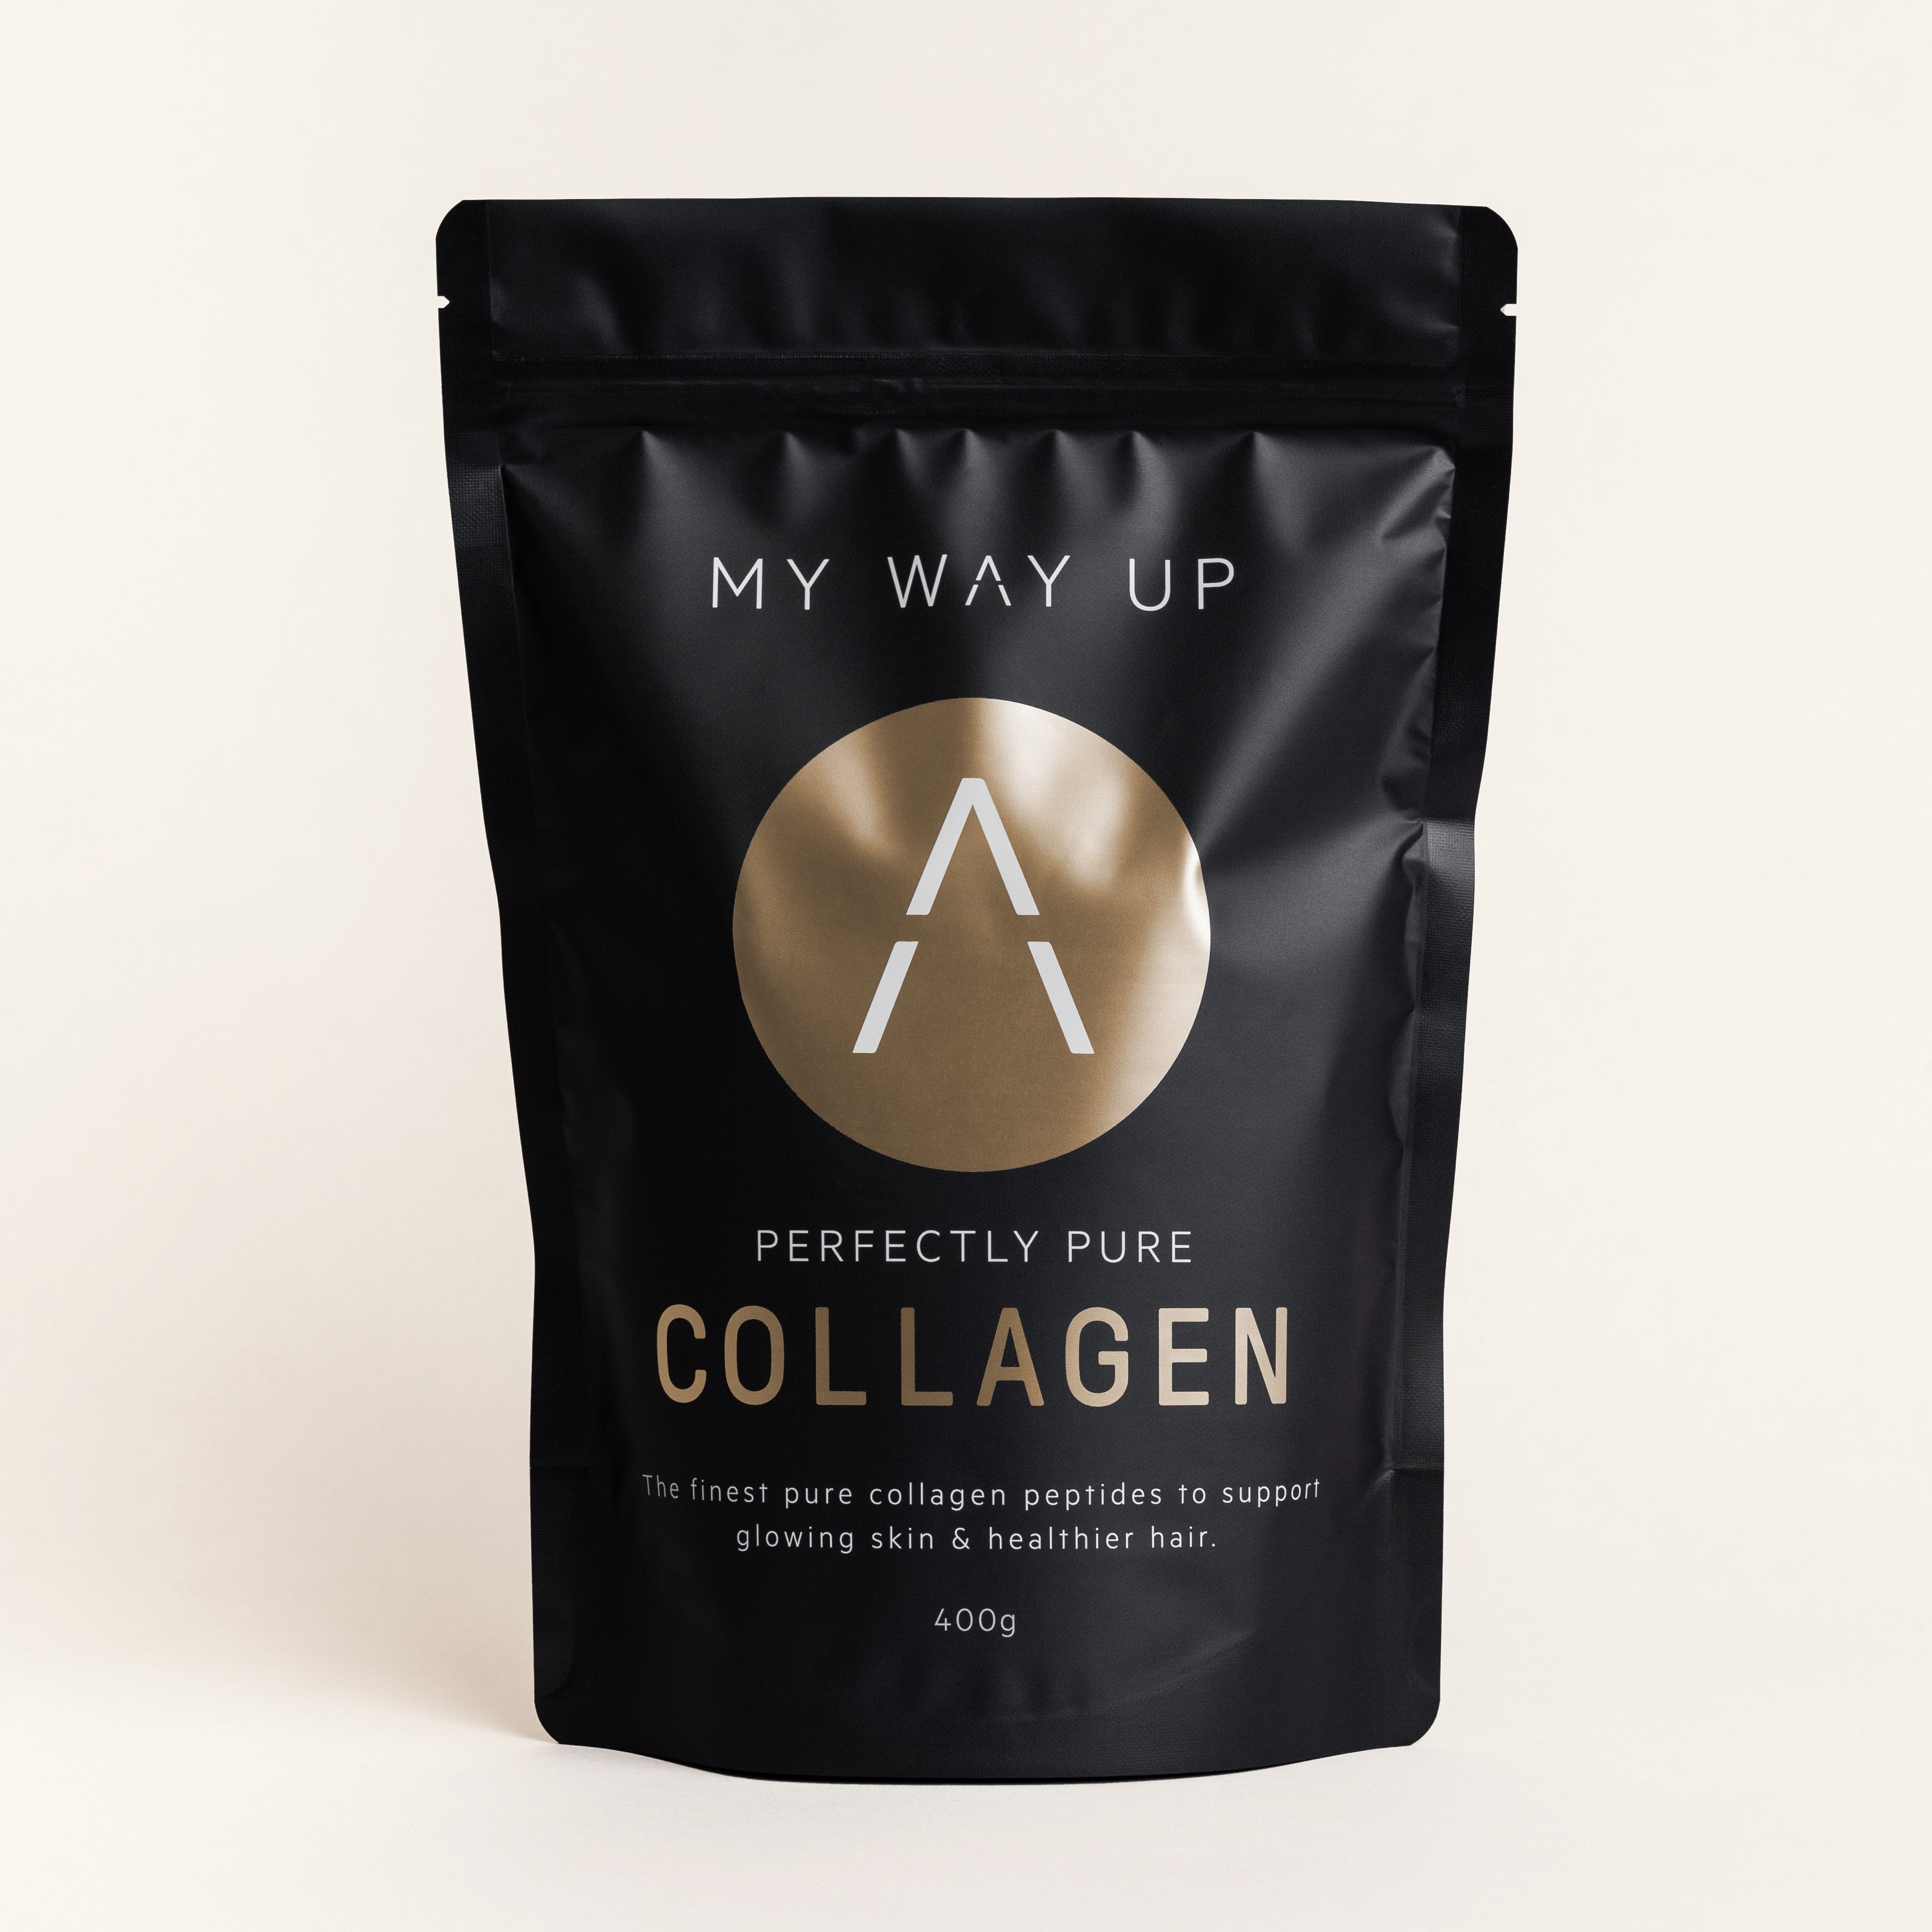 MY WAY UP PERFECTLY PURE COLLAGEN